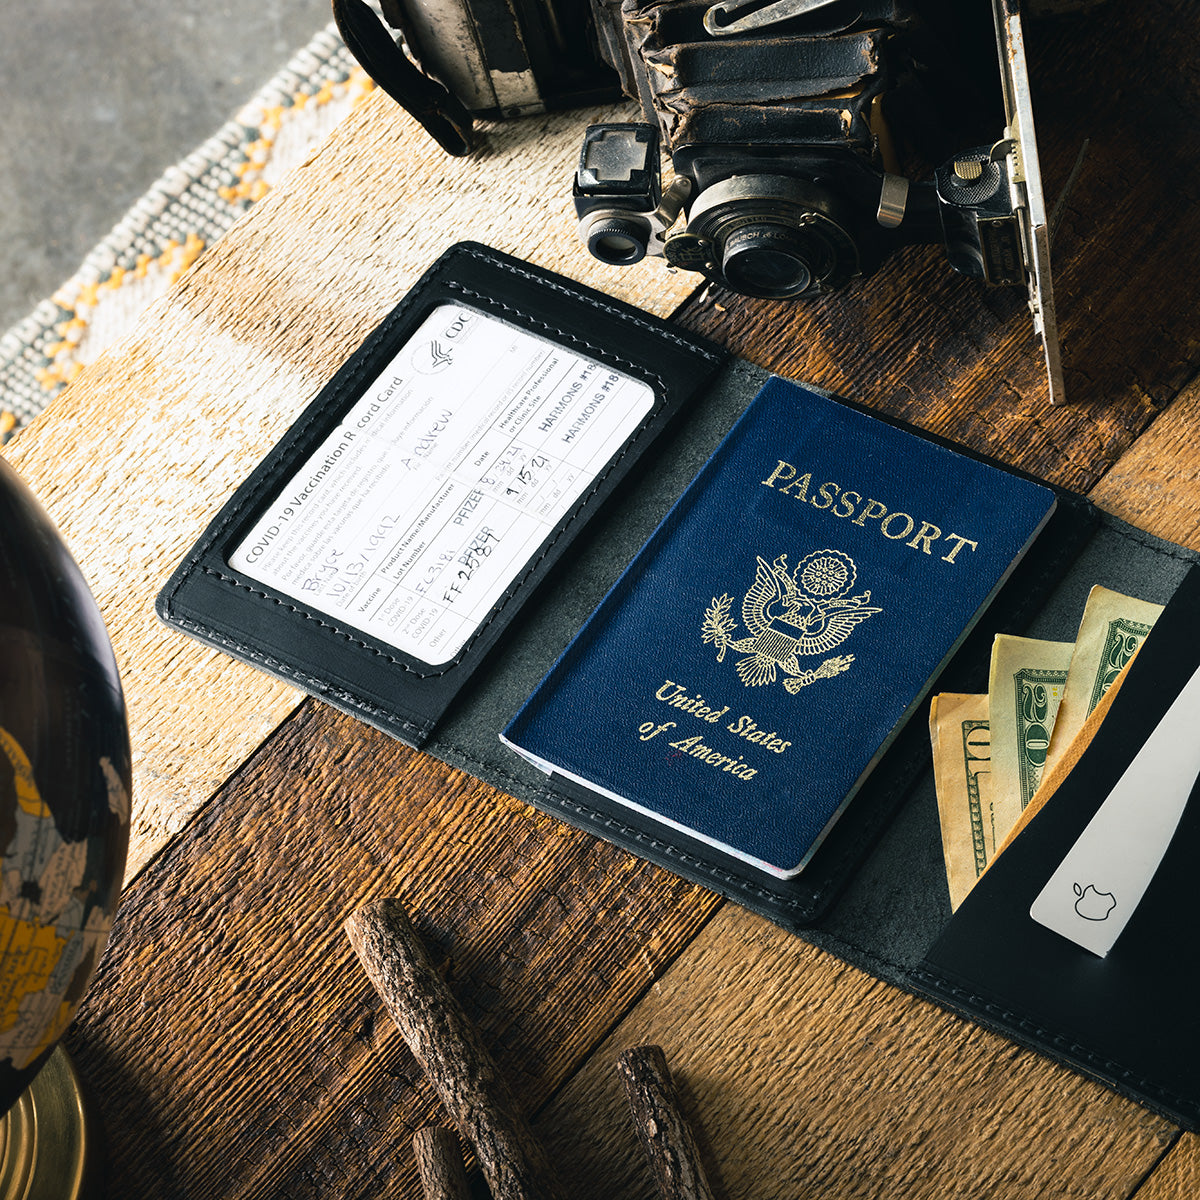 Top 14 Luxury Passport Covers for Christmas Gifts